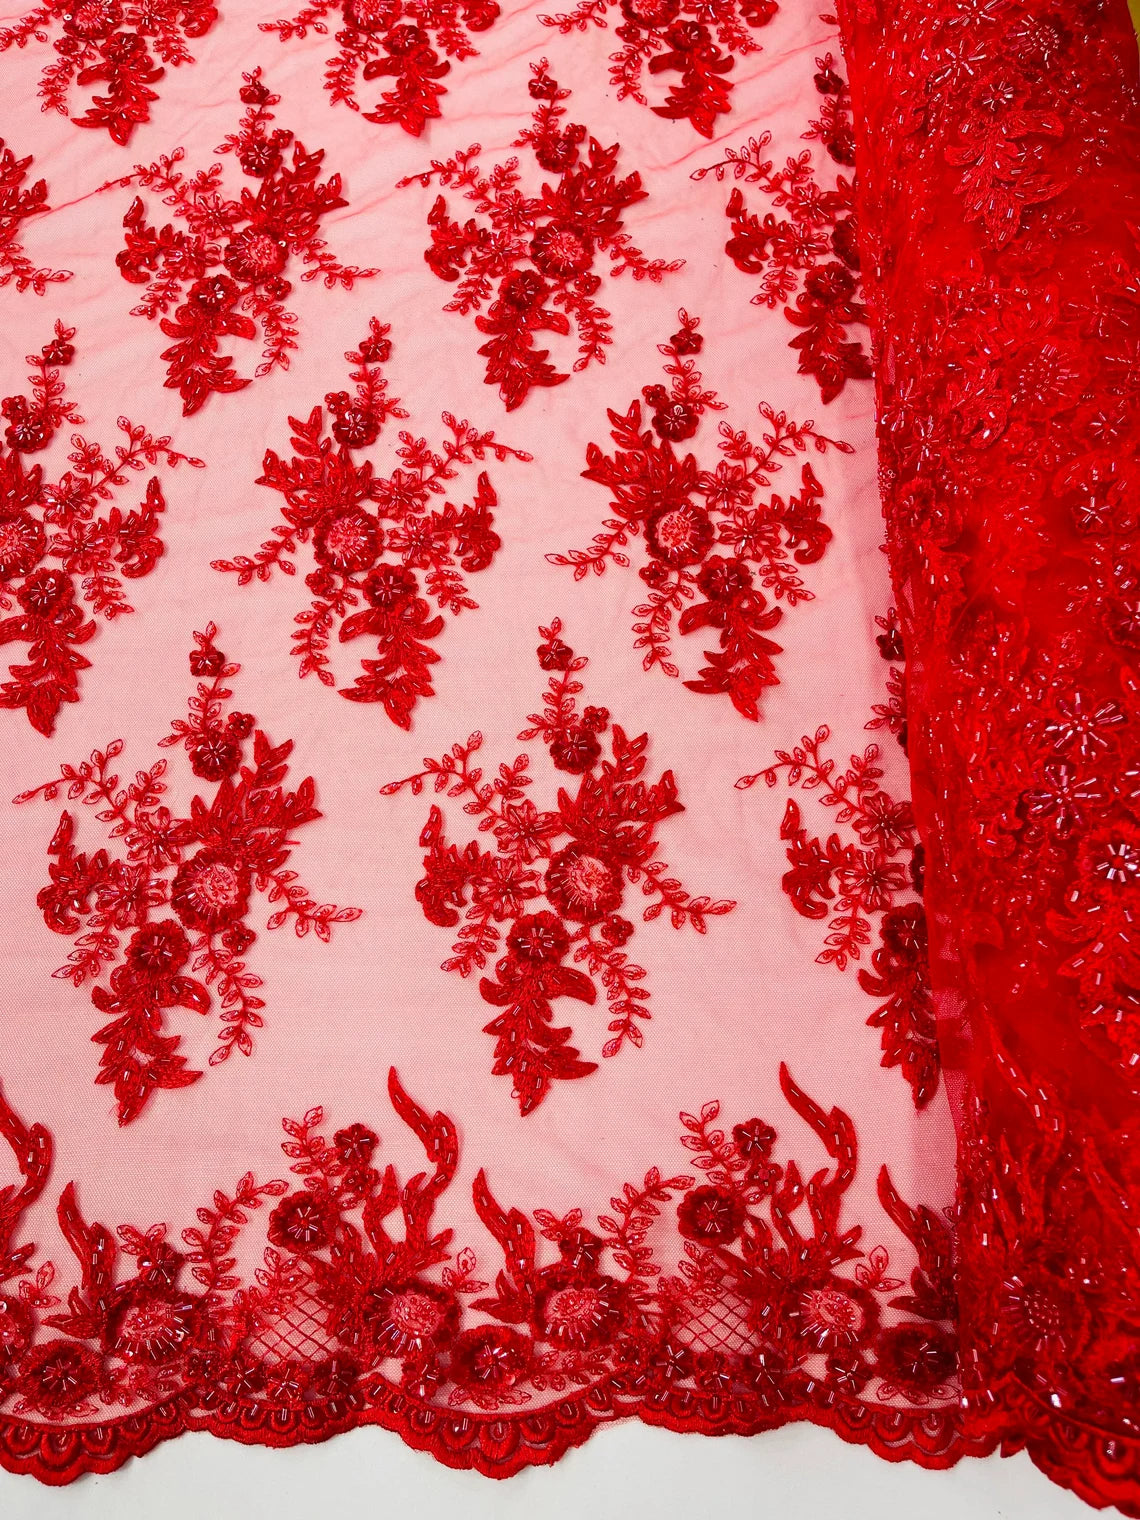 Floral Leaf Bead Sequins Fabric - Red - Embroidered Flower and Leaves Design Fabric By Yard